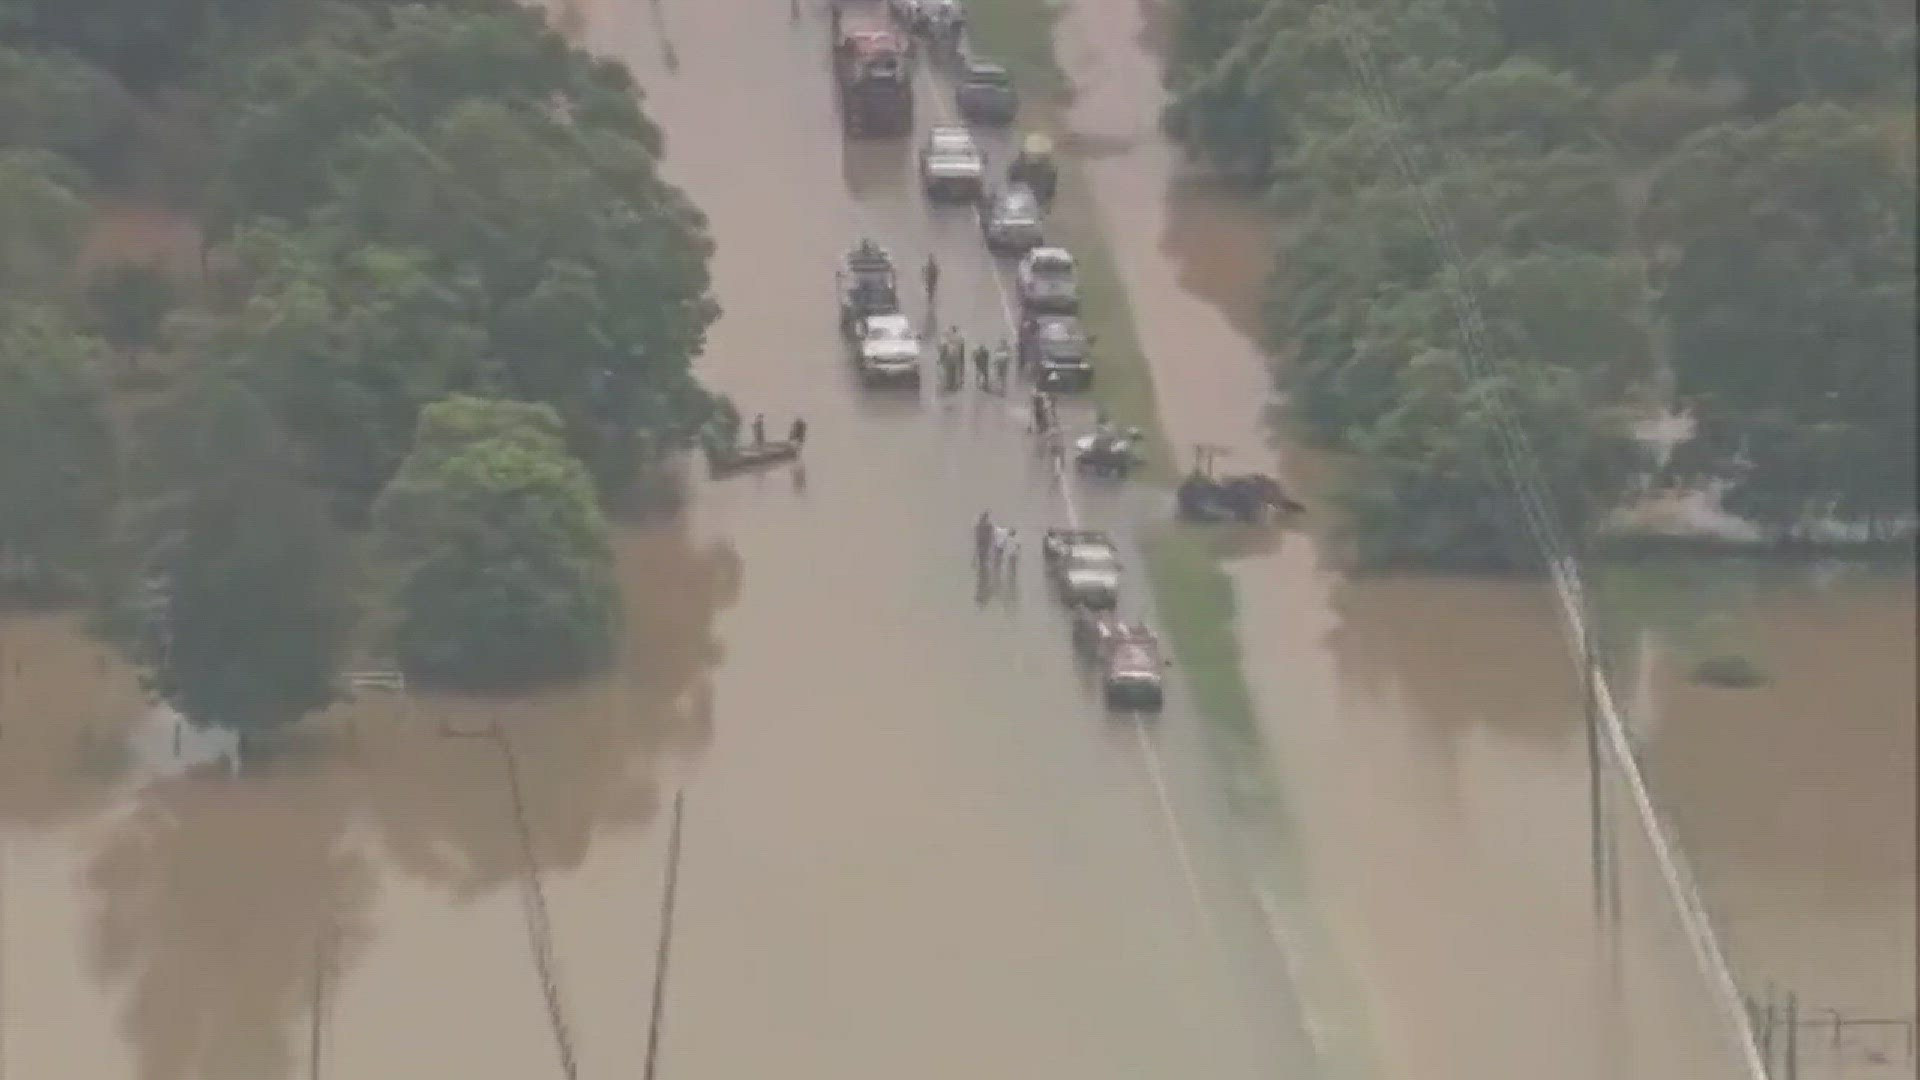 Rescue crews worked to save animals trapped by floodwaters in Brazoria County on Friday morning.